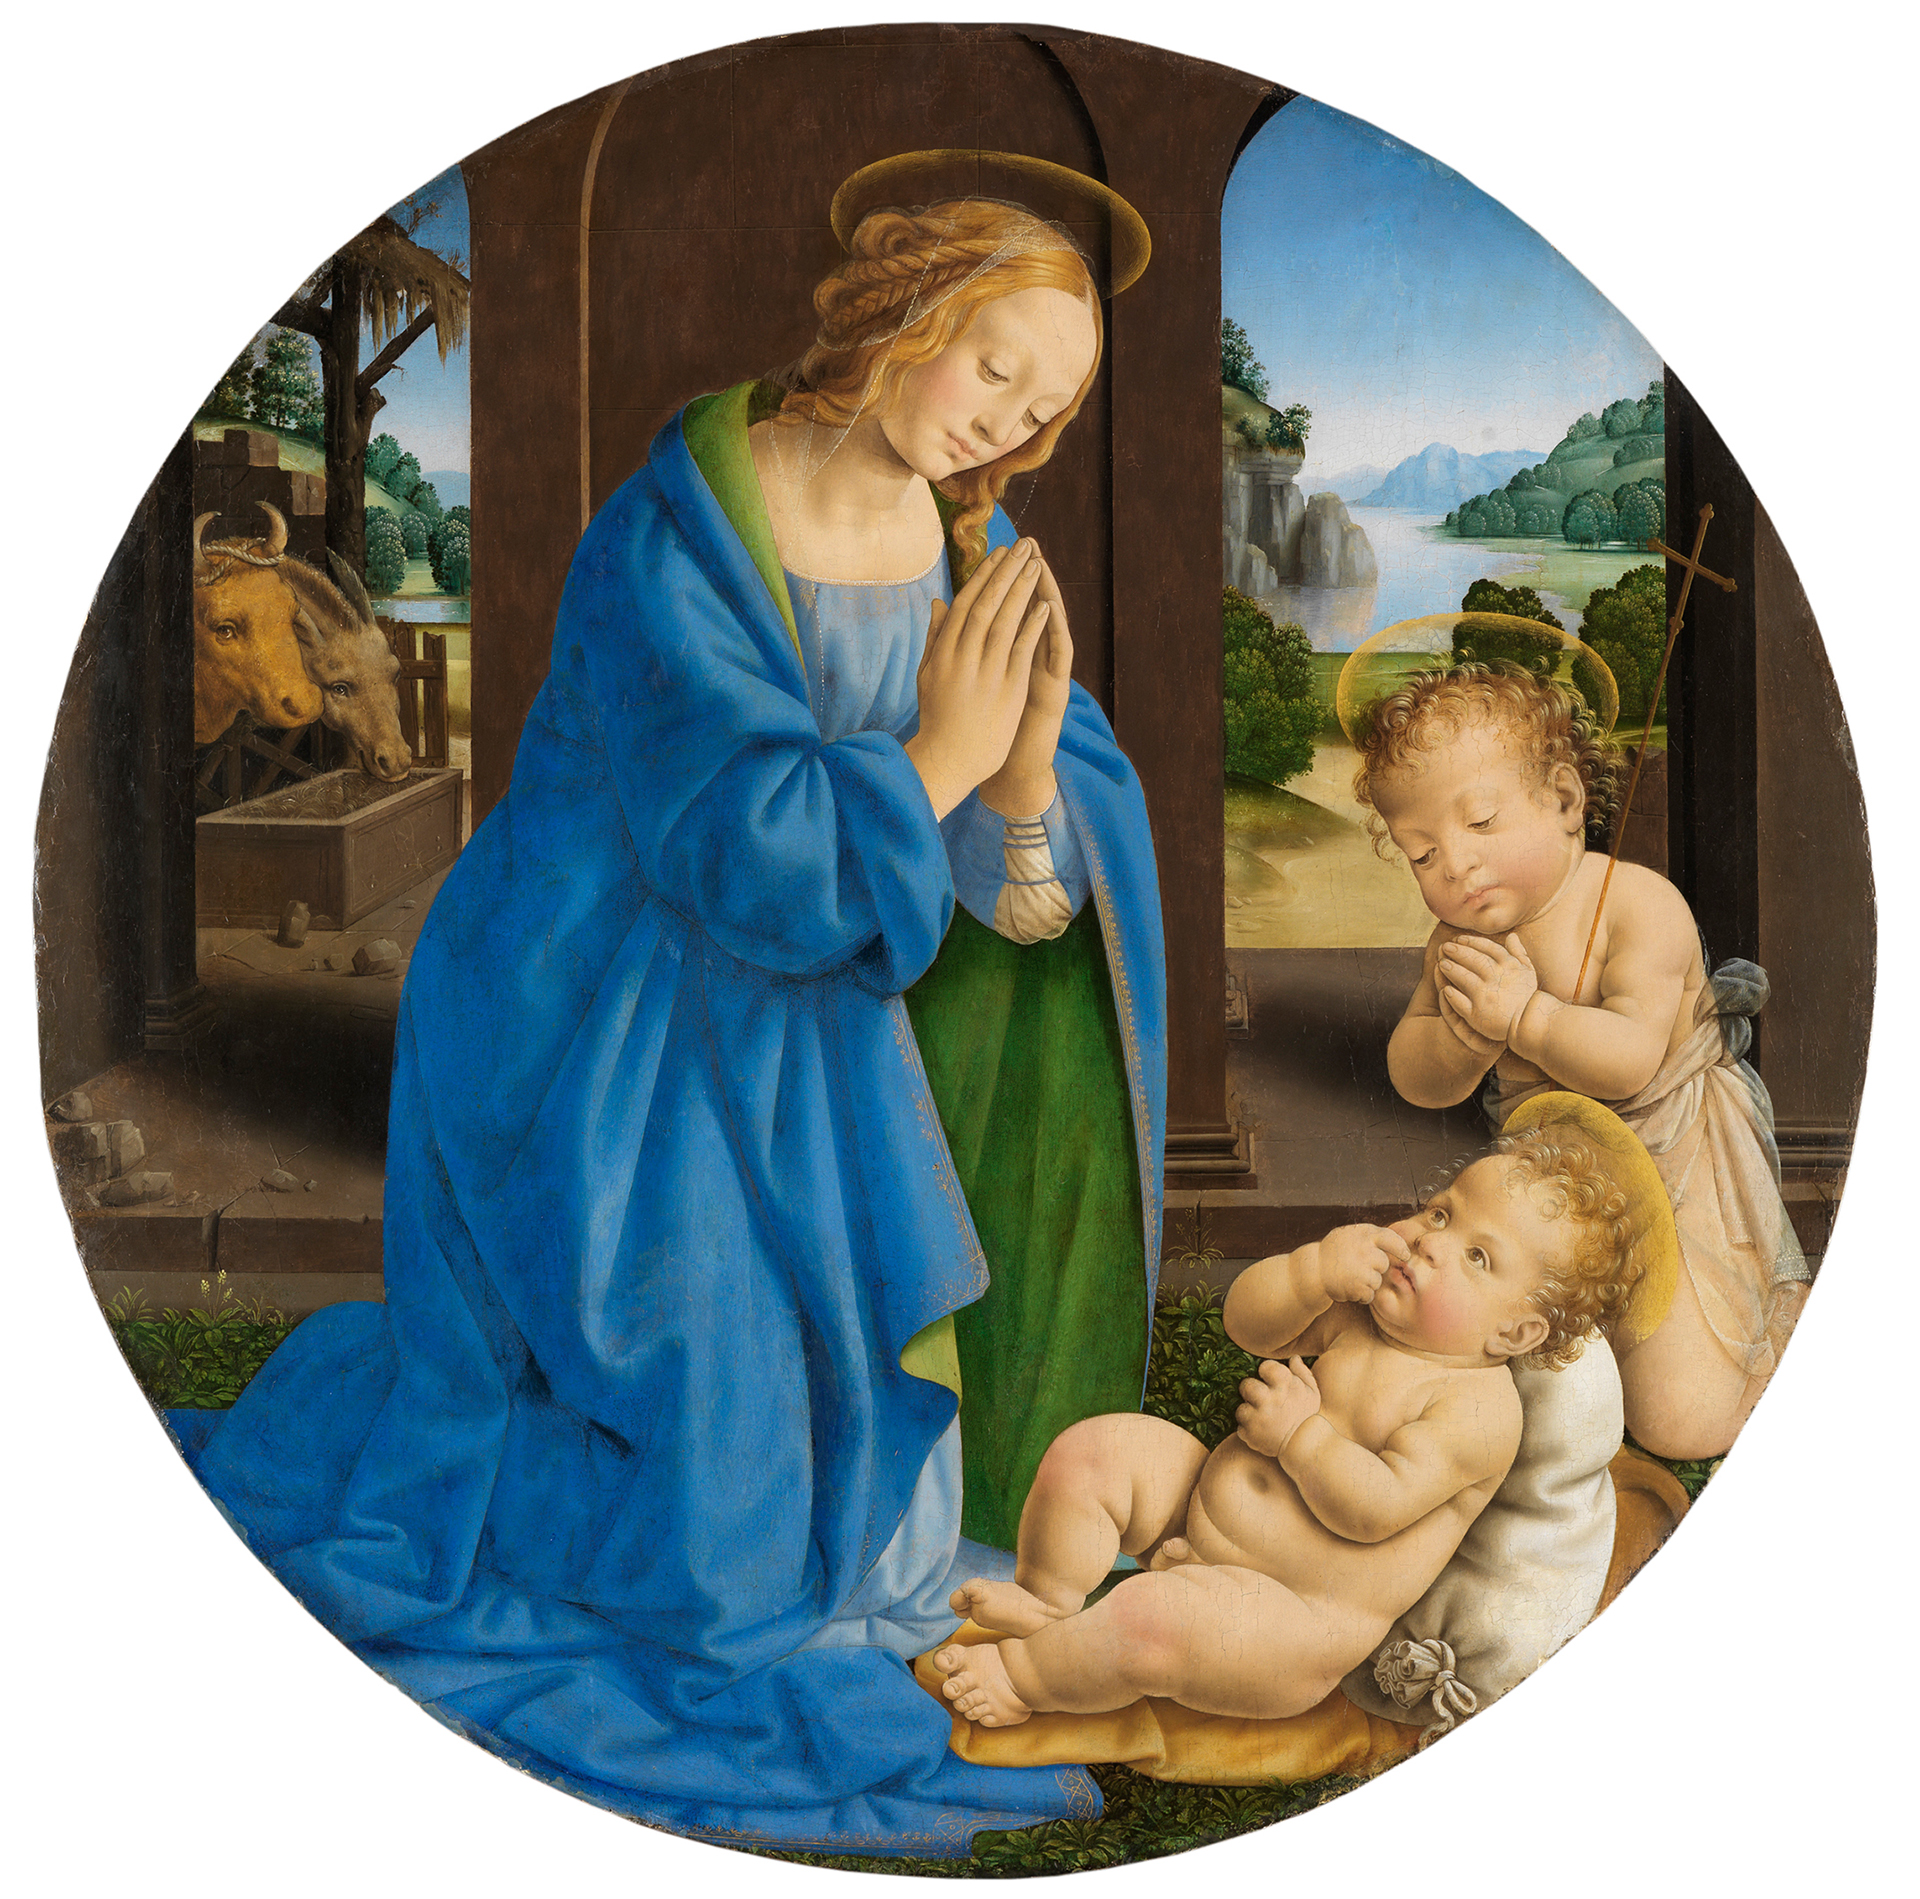 The work of art Lorenzo di Credi Maria, the Child adoring, with the Johannesknaben shows Maria kneeling in a blue dress. In front of her is the baby Jesus. Next to it is another baby, praying. The painting is in the Kunsthalle Karlsruhe.